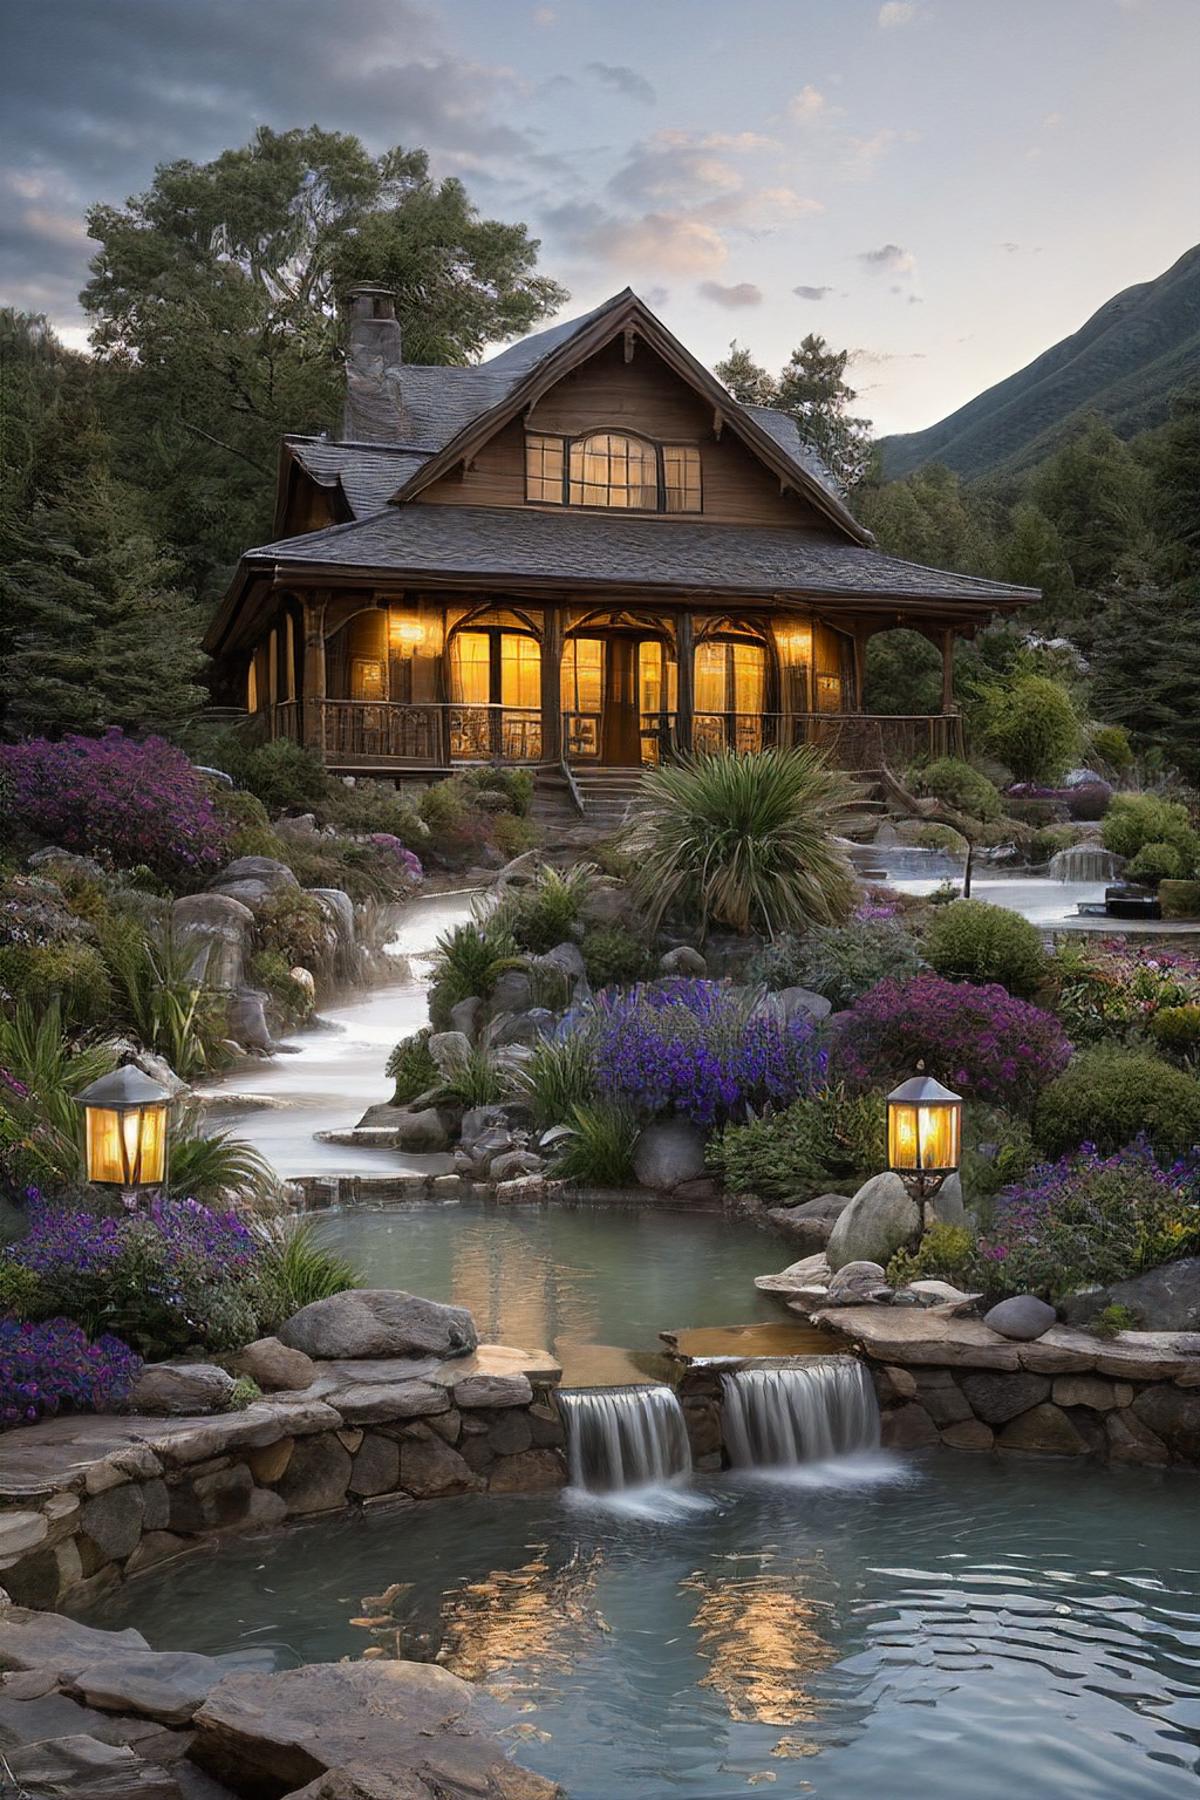 A large house with a beautiful garden and waterfall.